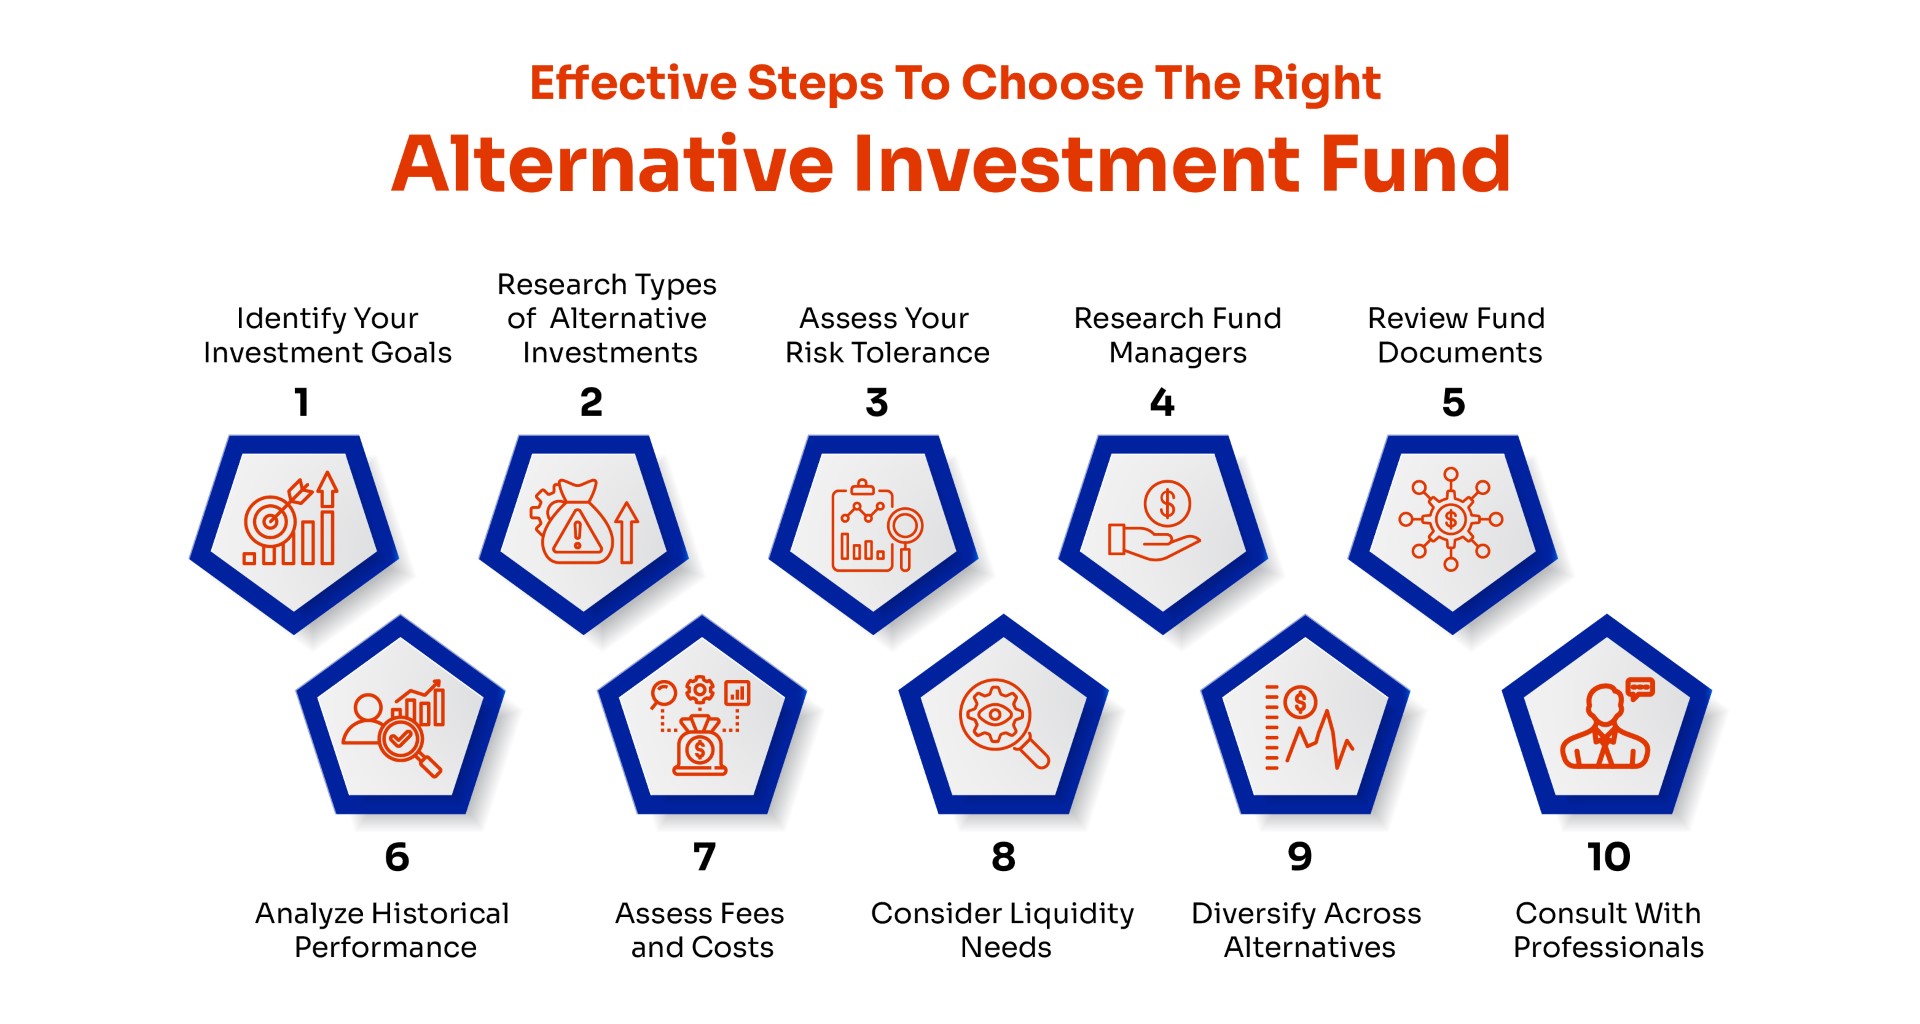 How to Choose the Right Alternative Investment Fund